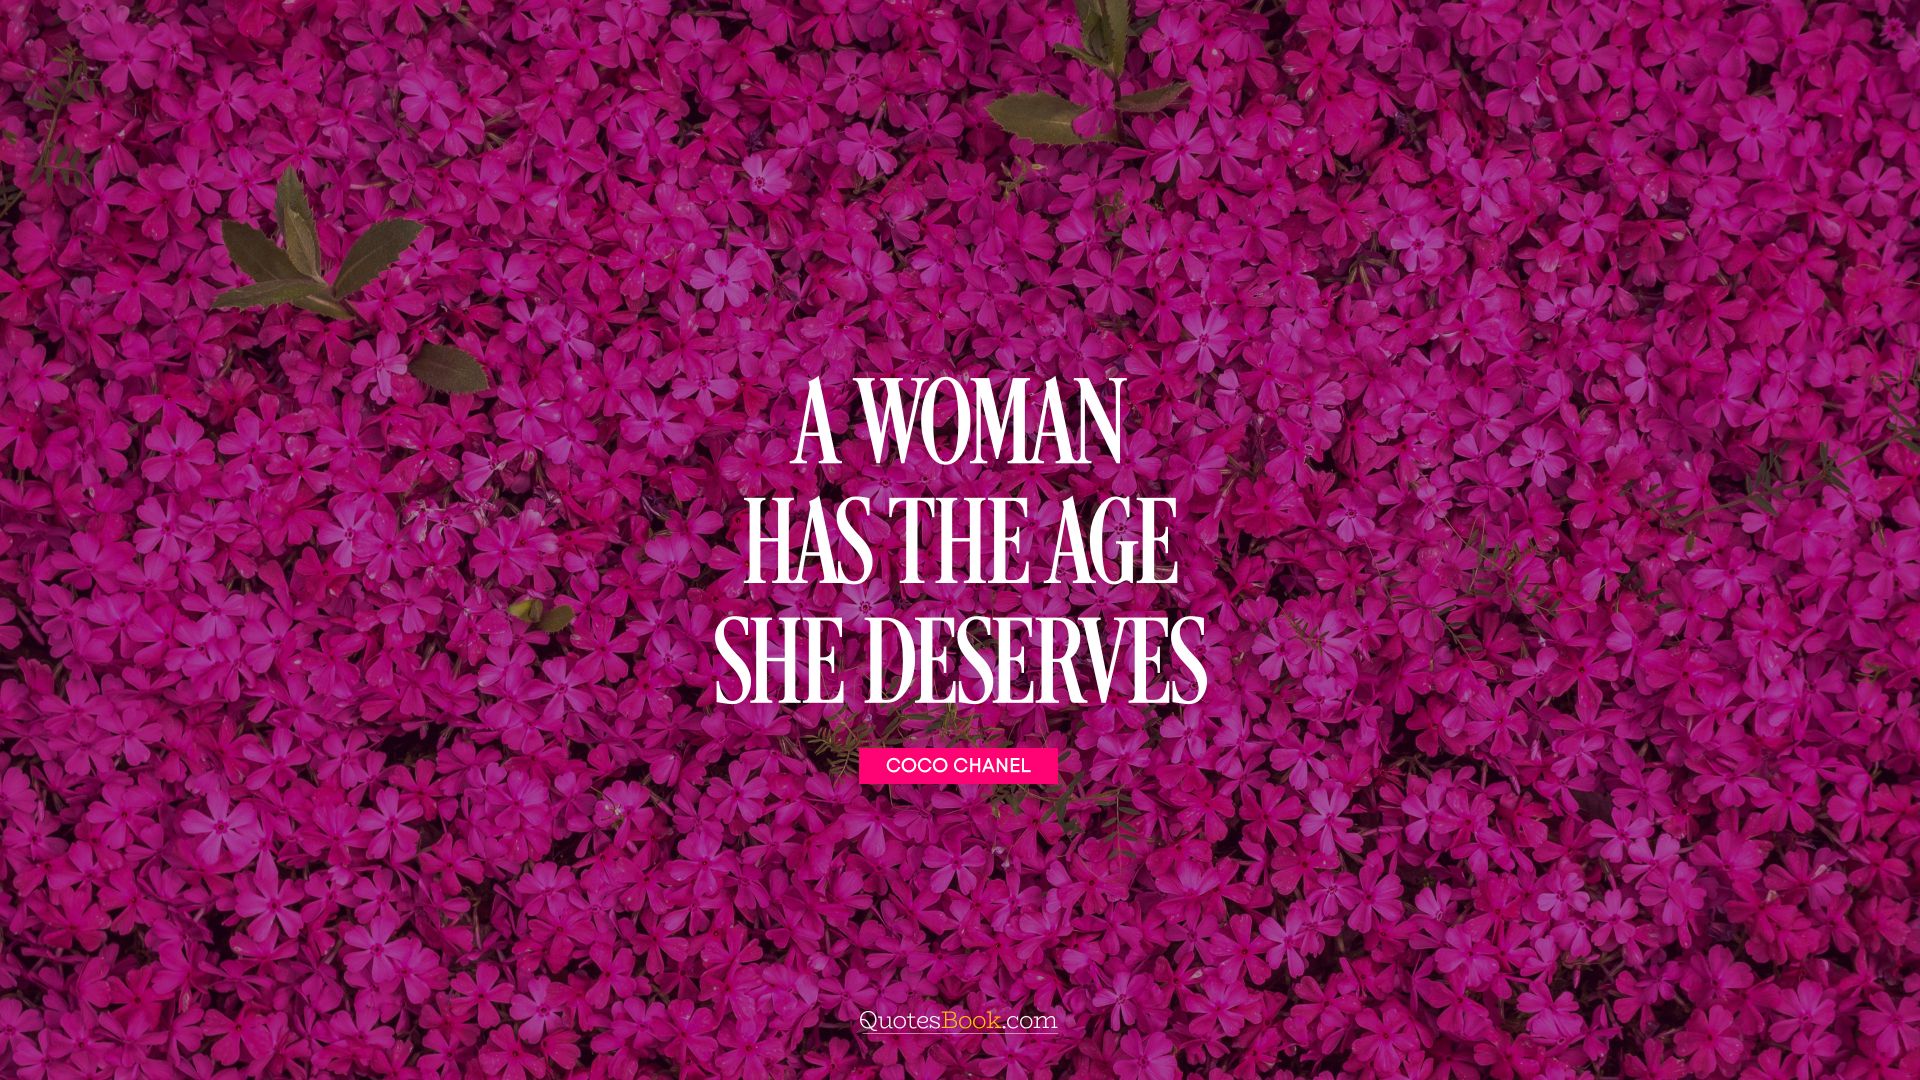 A woman has the age she deserves. - Quote by Coco Chanel